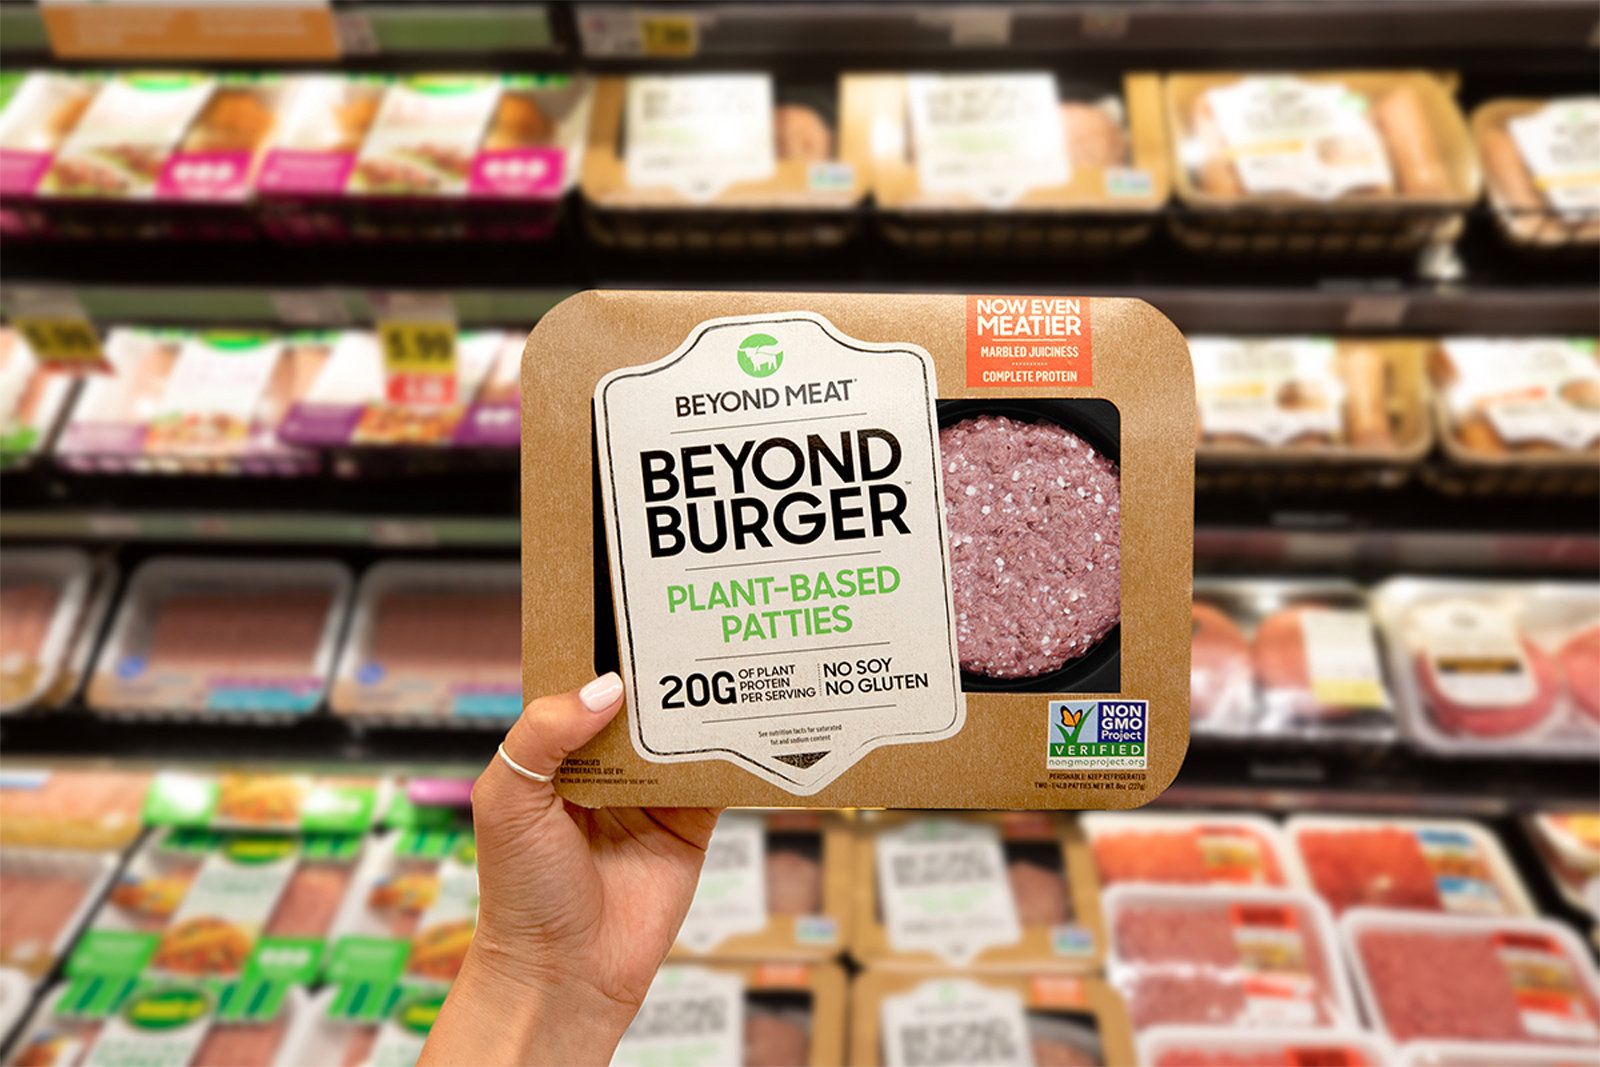 Plant-Based Investments Are Bringing Home The Bacon